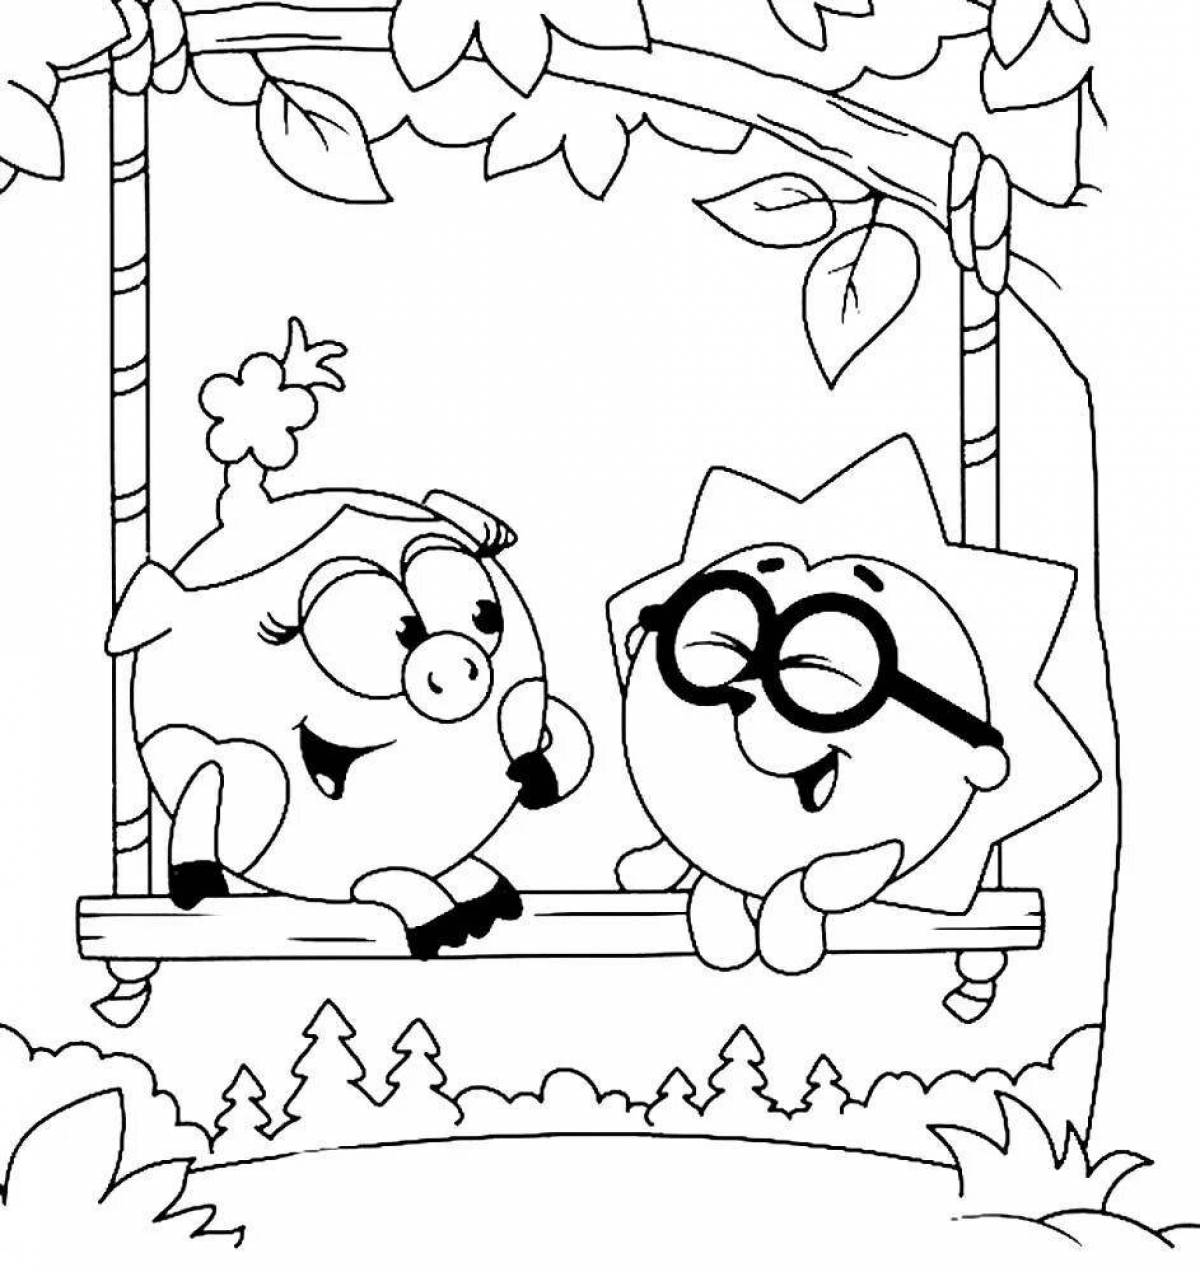 Bright Smeshariki coloring pages